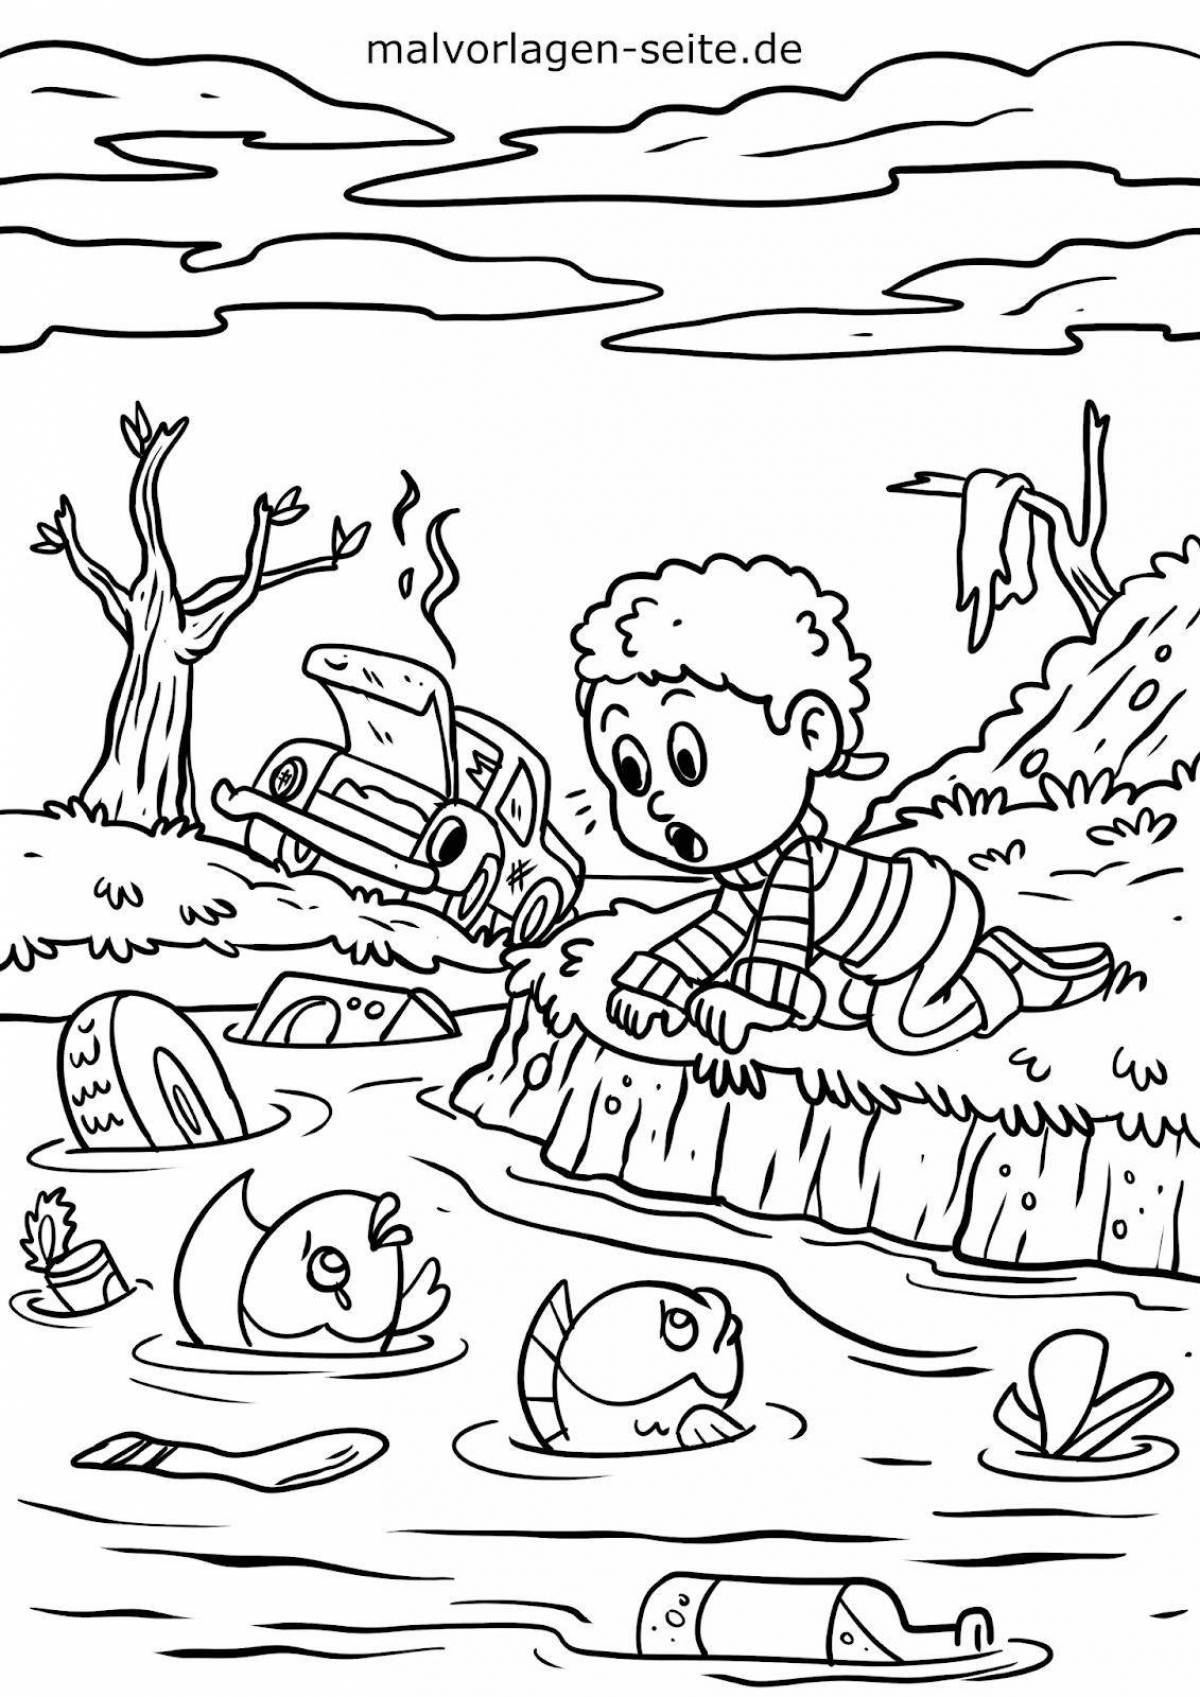 Innovative ecological coloring book for preschoolers